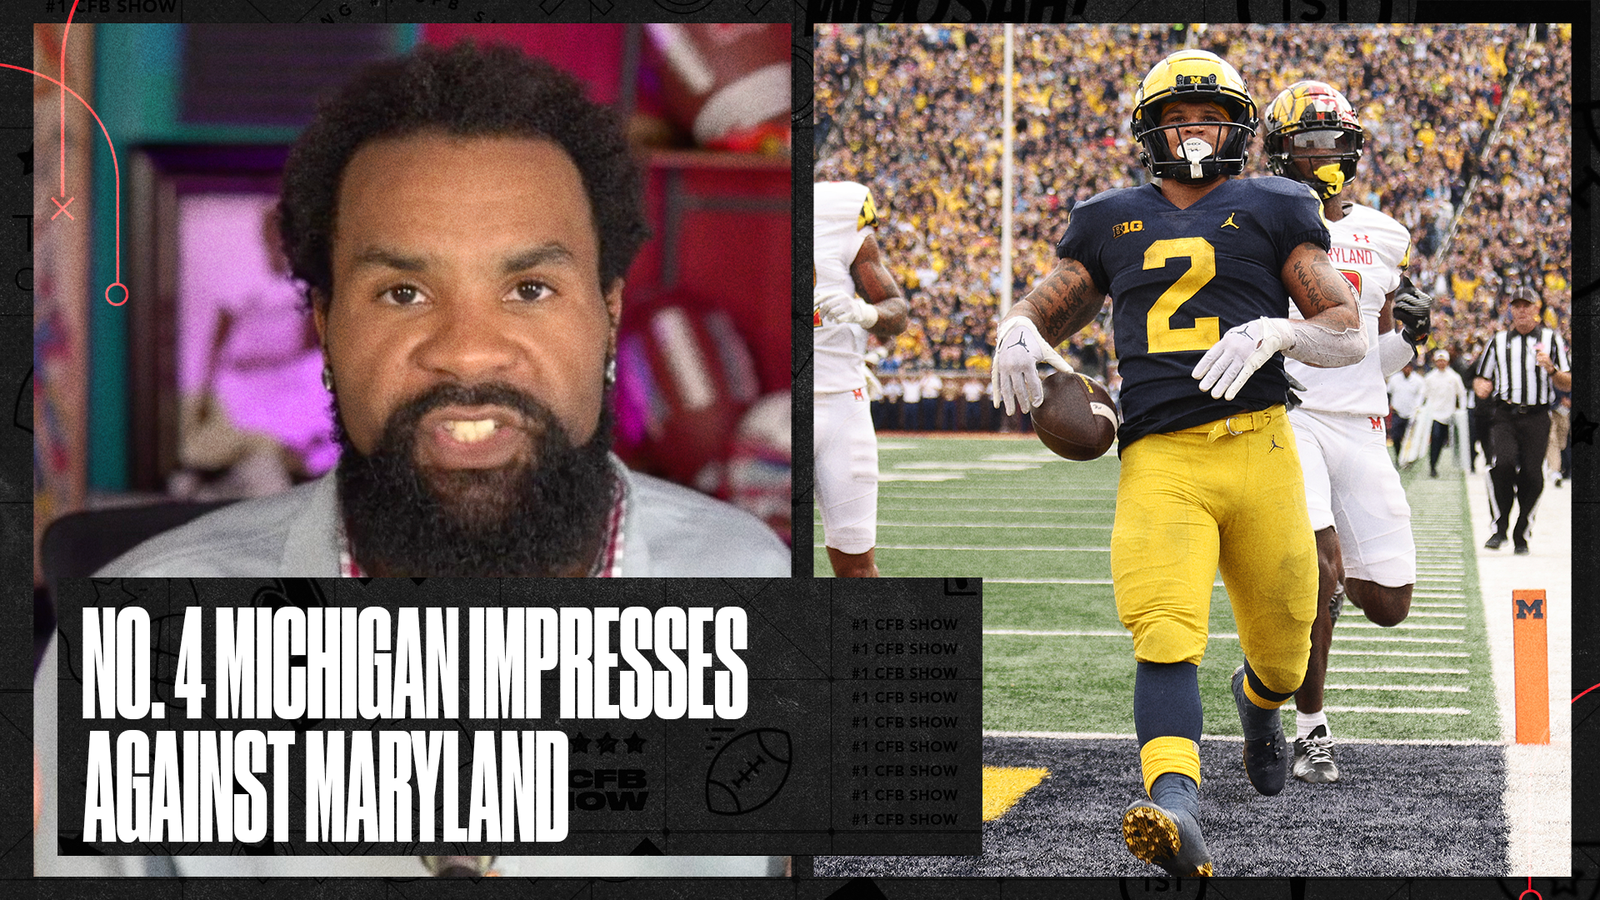 Michigan impresses in win over Maryland